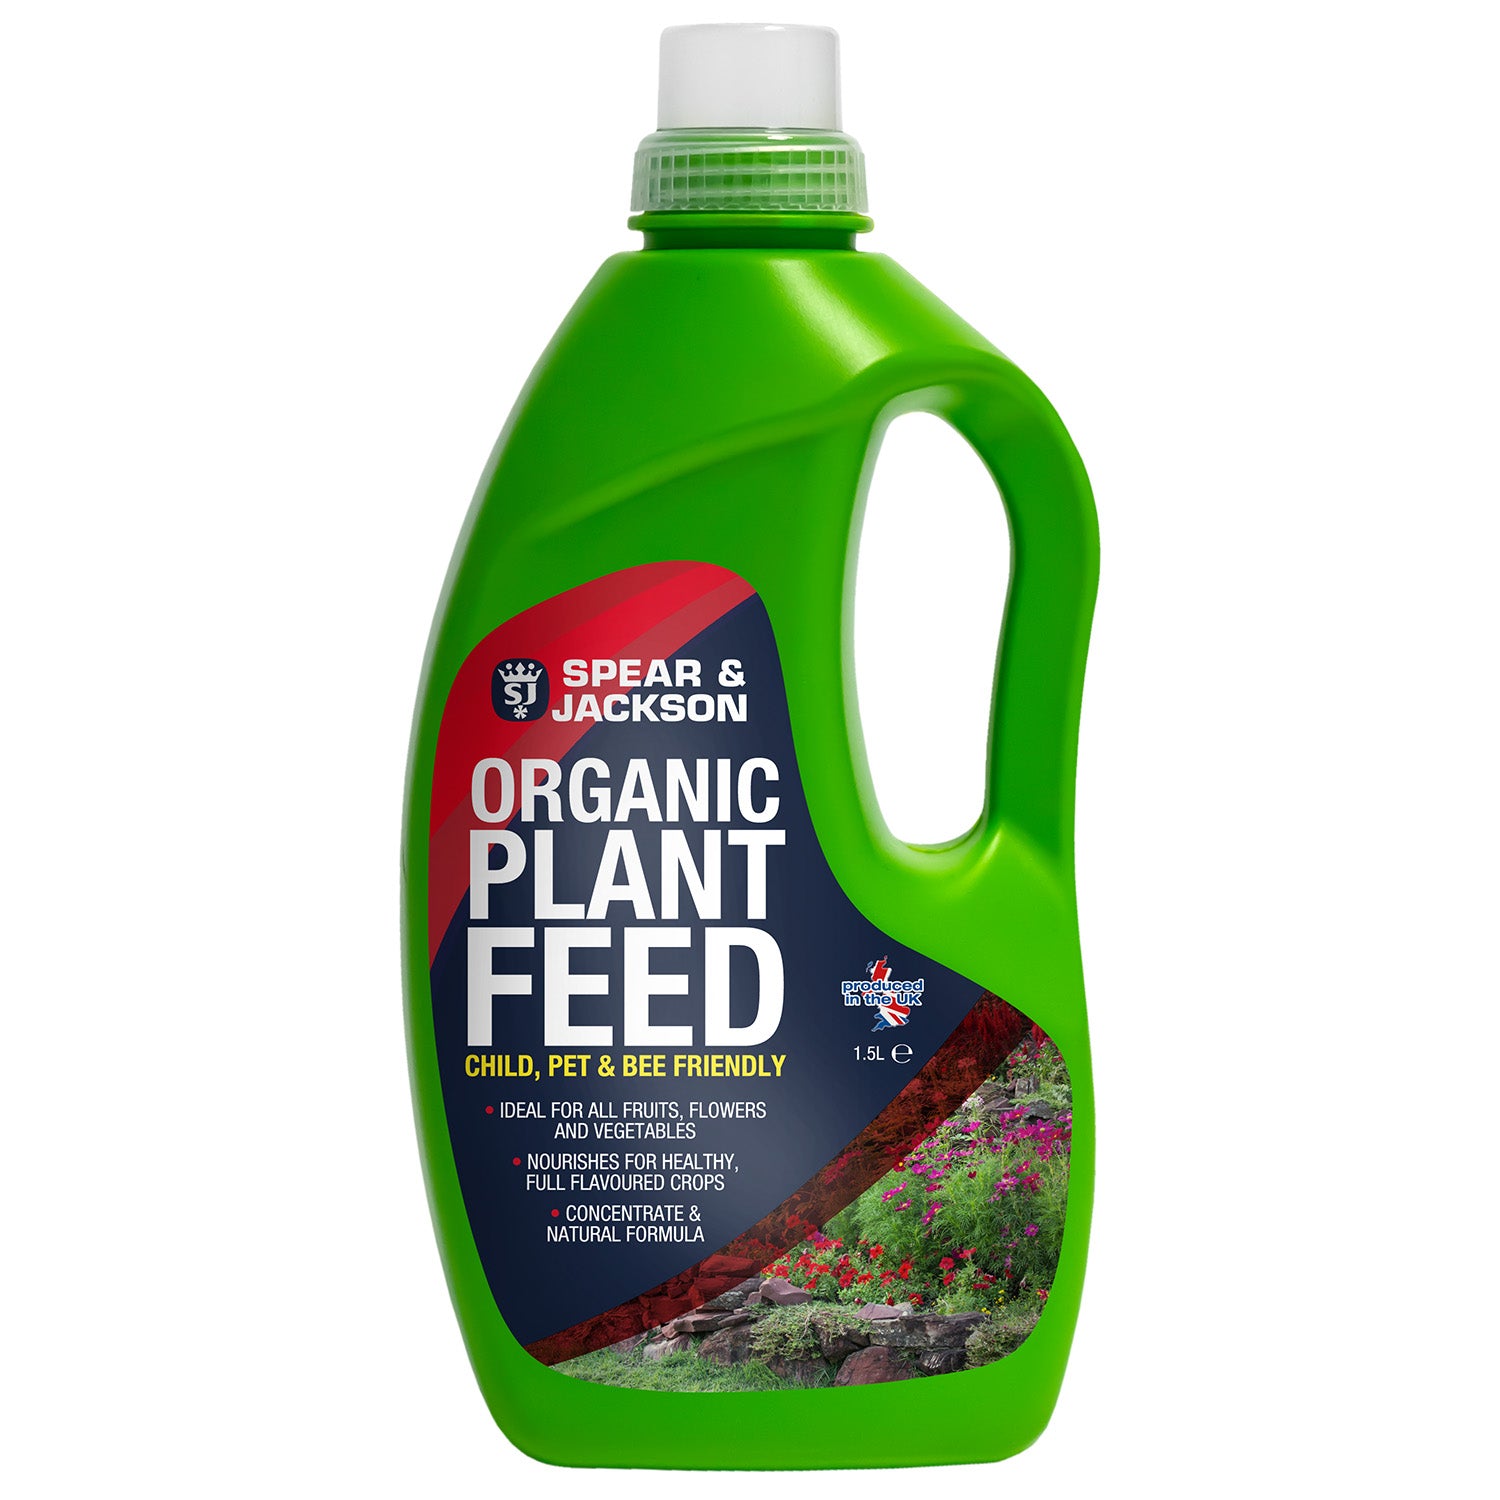 S&J Organic Liquid Plant Feed Concentrate 1.5L